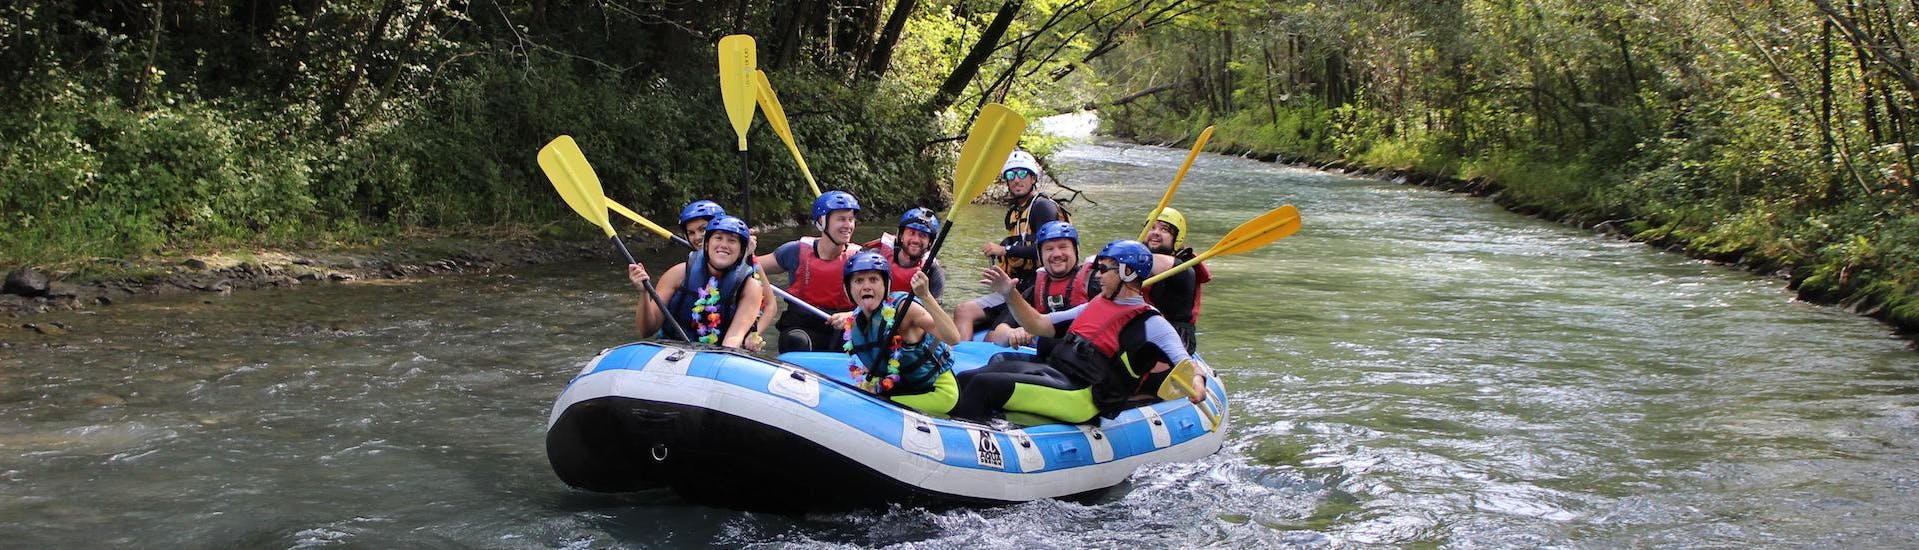 Participants of the Rafting Classic on the Adda River with Indomita Valtellina River are having a great time.